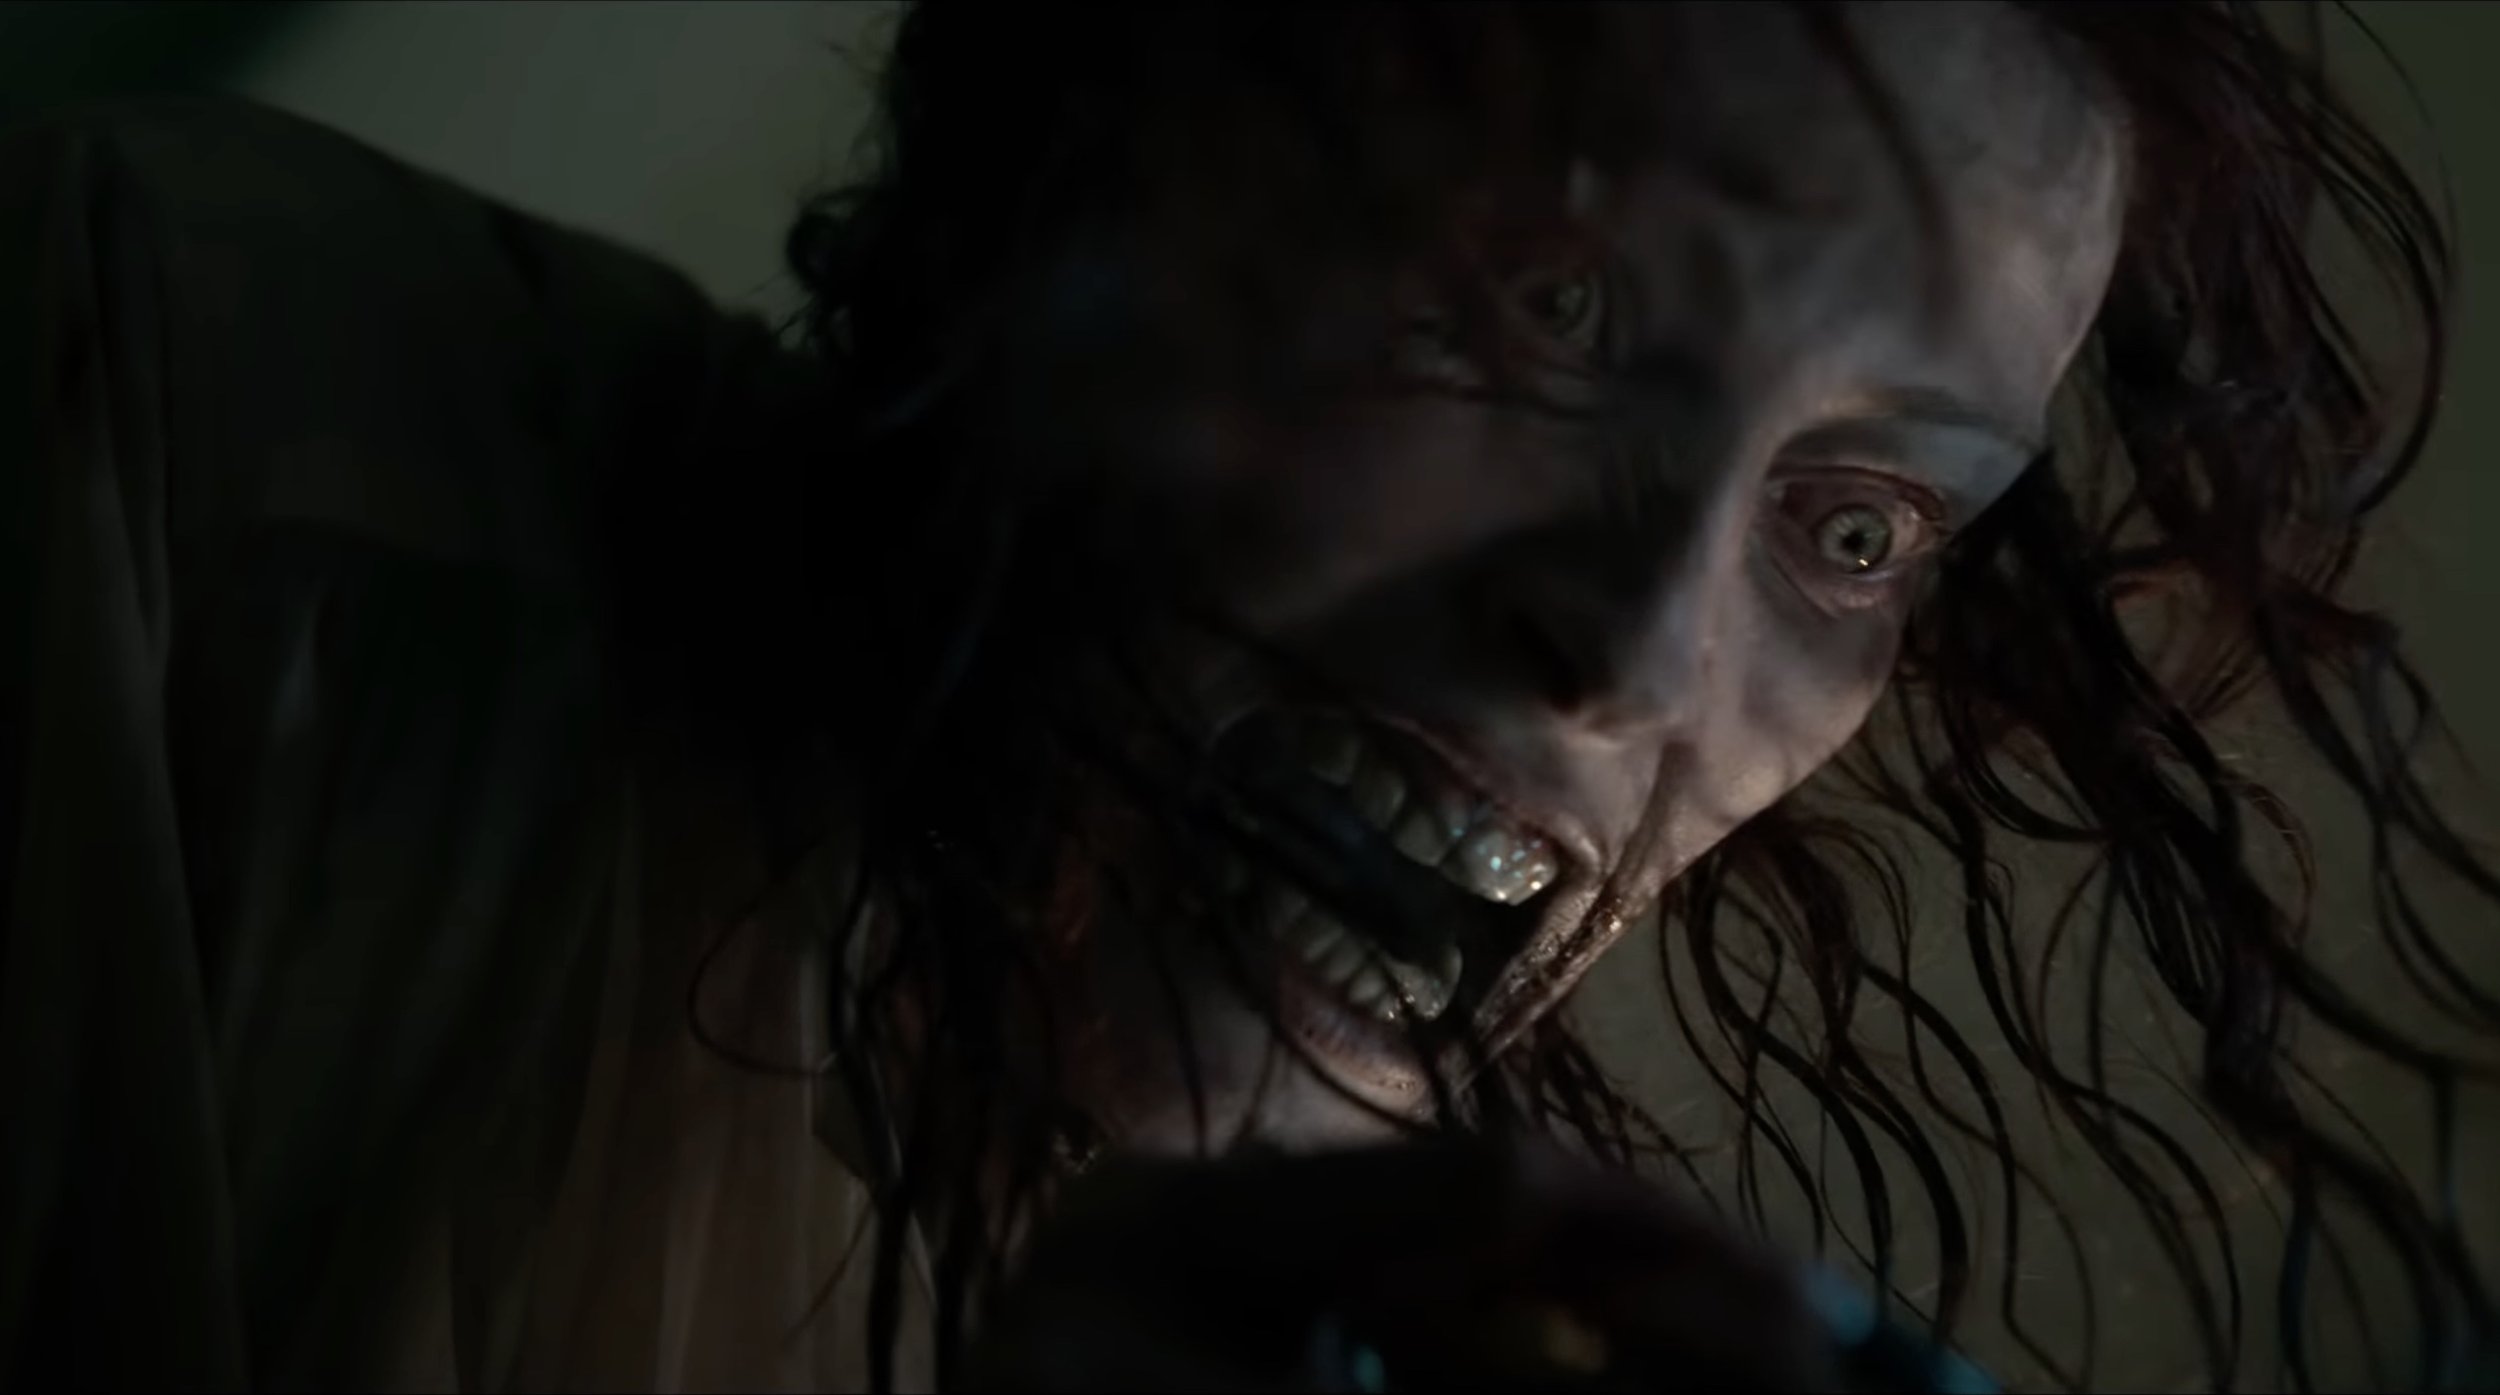 Evil Dead Rise (2023) Movie Information & Trailers